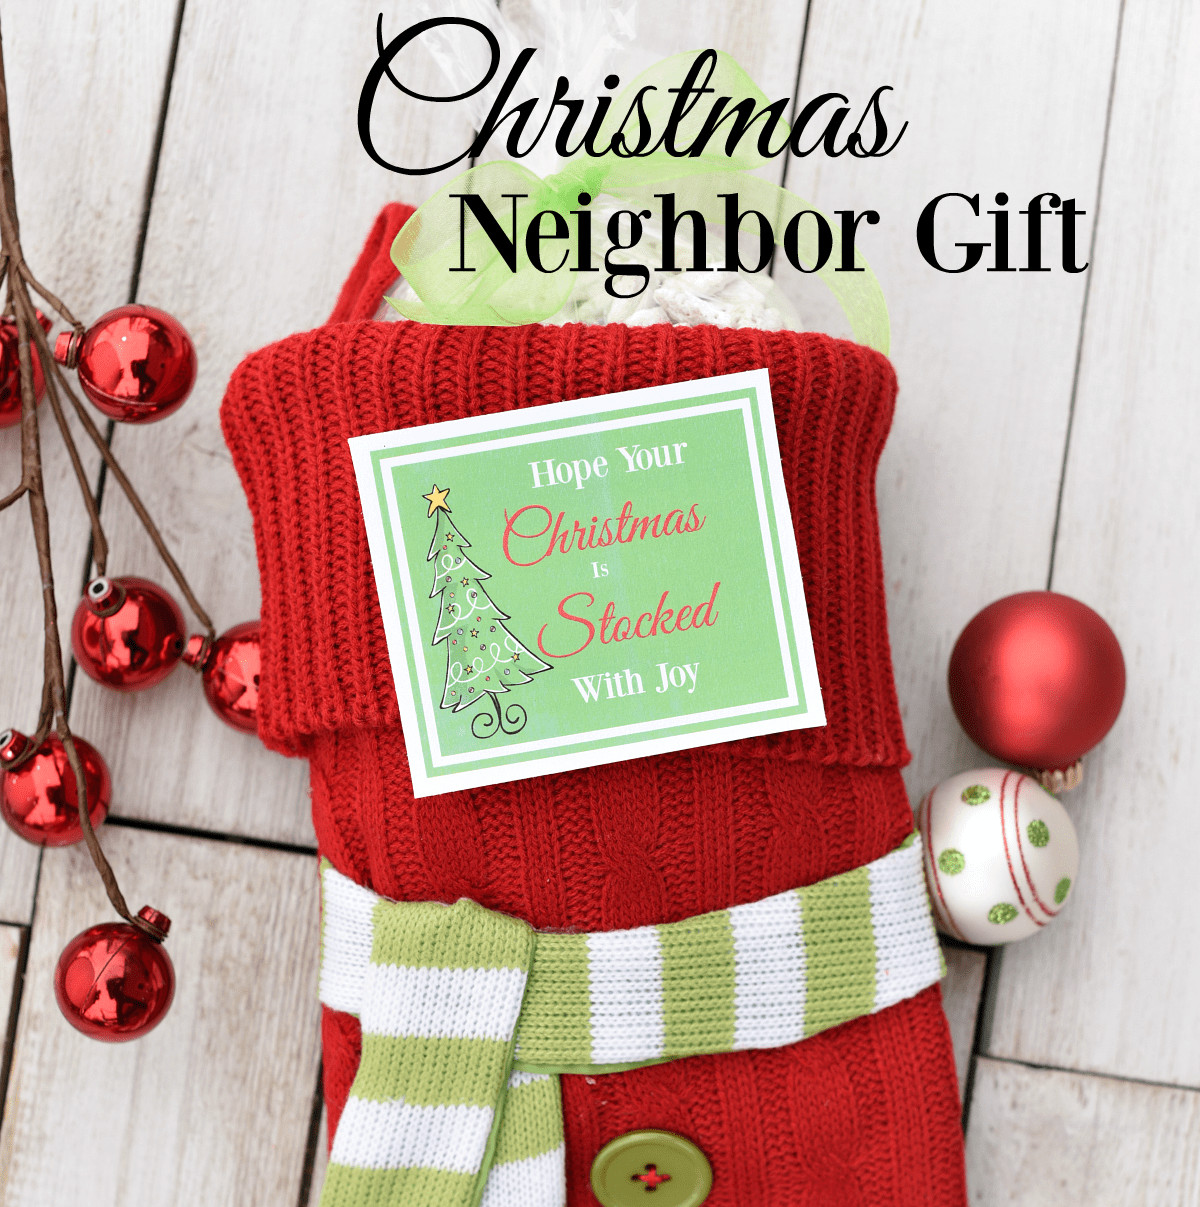 Fun Holiday Gift Ideas
 25 Fun Christmas Gifts for Friends and Neighbors – Fun Squared